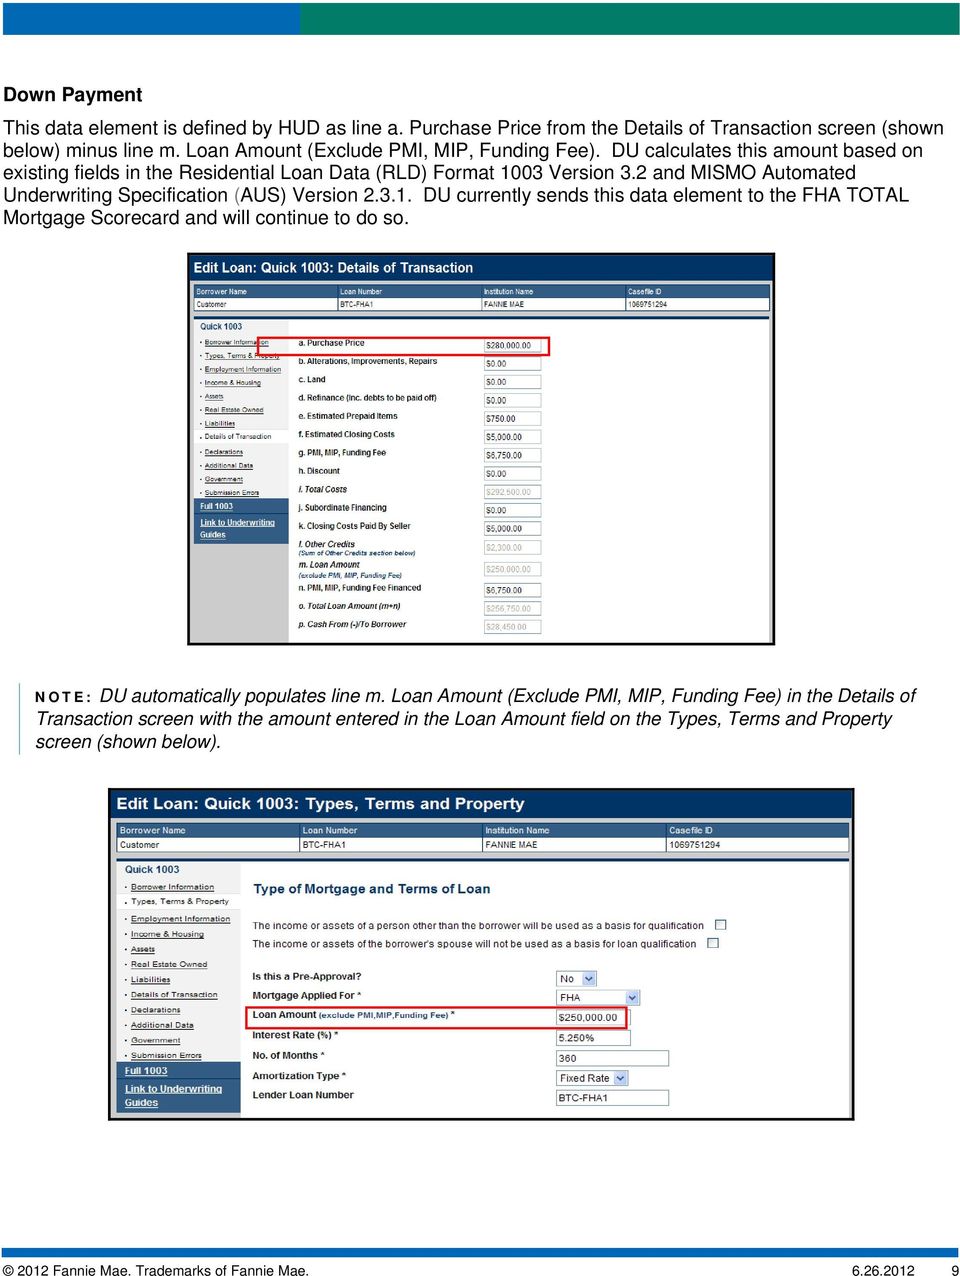 03 Version 3.2 and MISMO Automated Underwriting Specification (AUS) Version 2.3.1. DU currently sends this data element to the FHA TOTAL Mortgage Scorecard and will continue to do so.